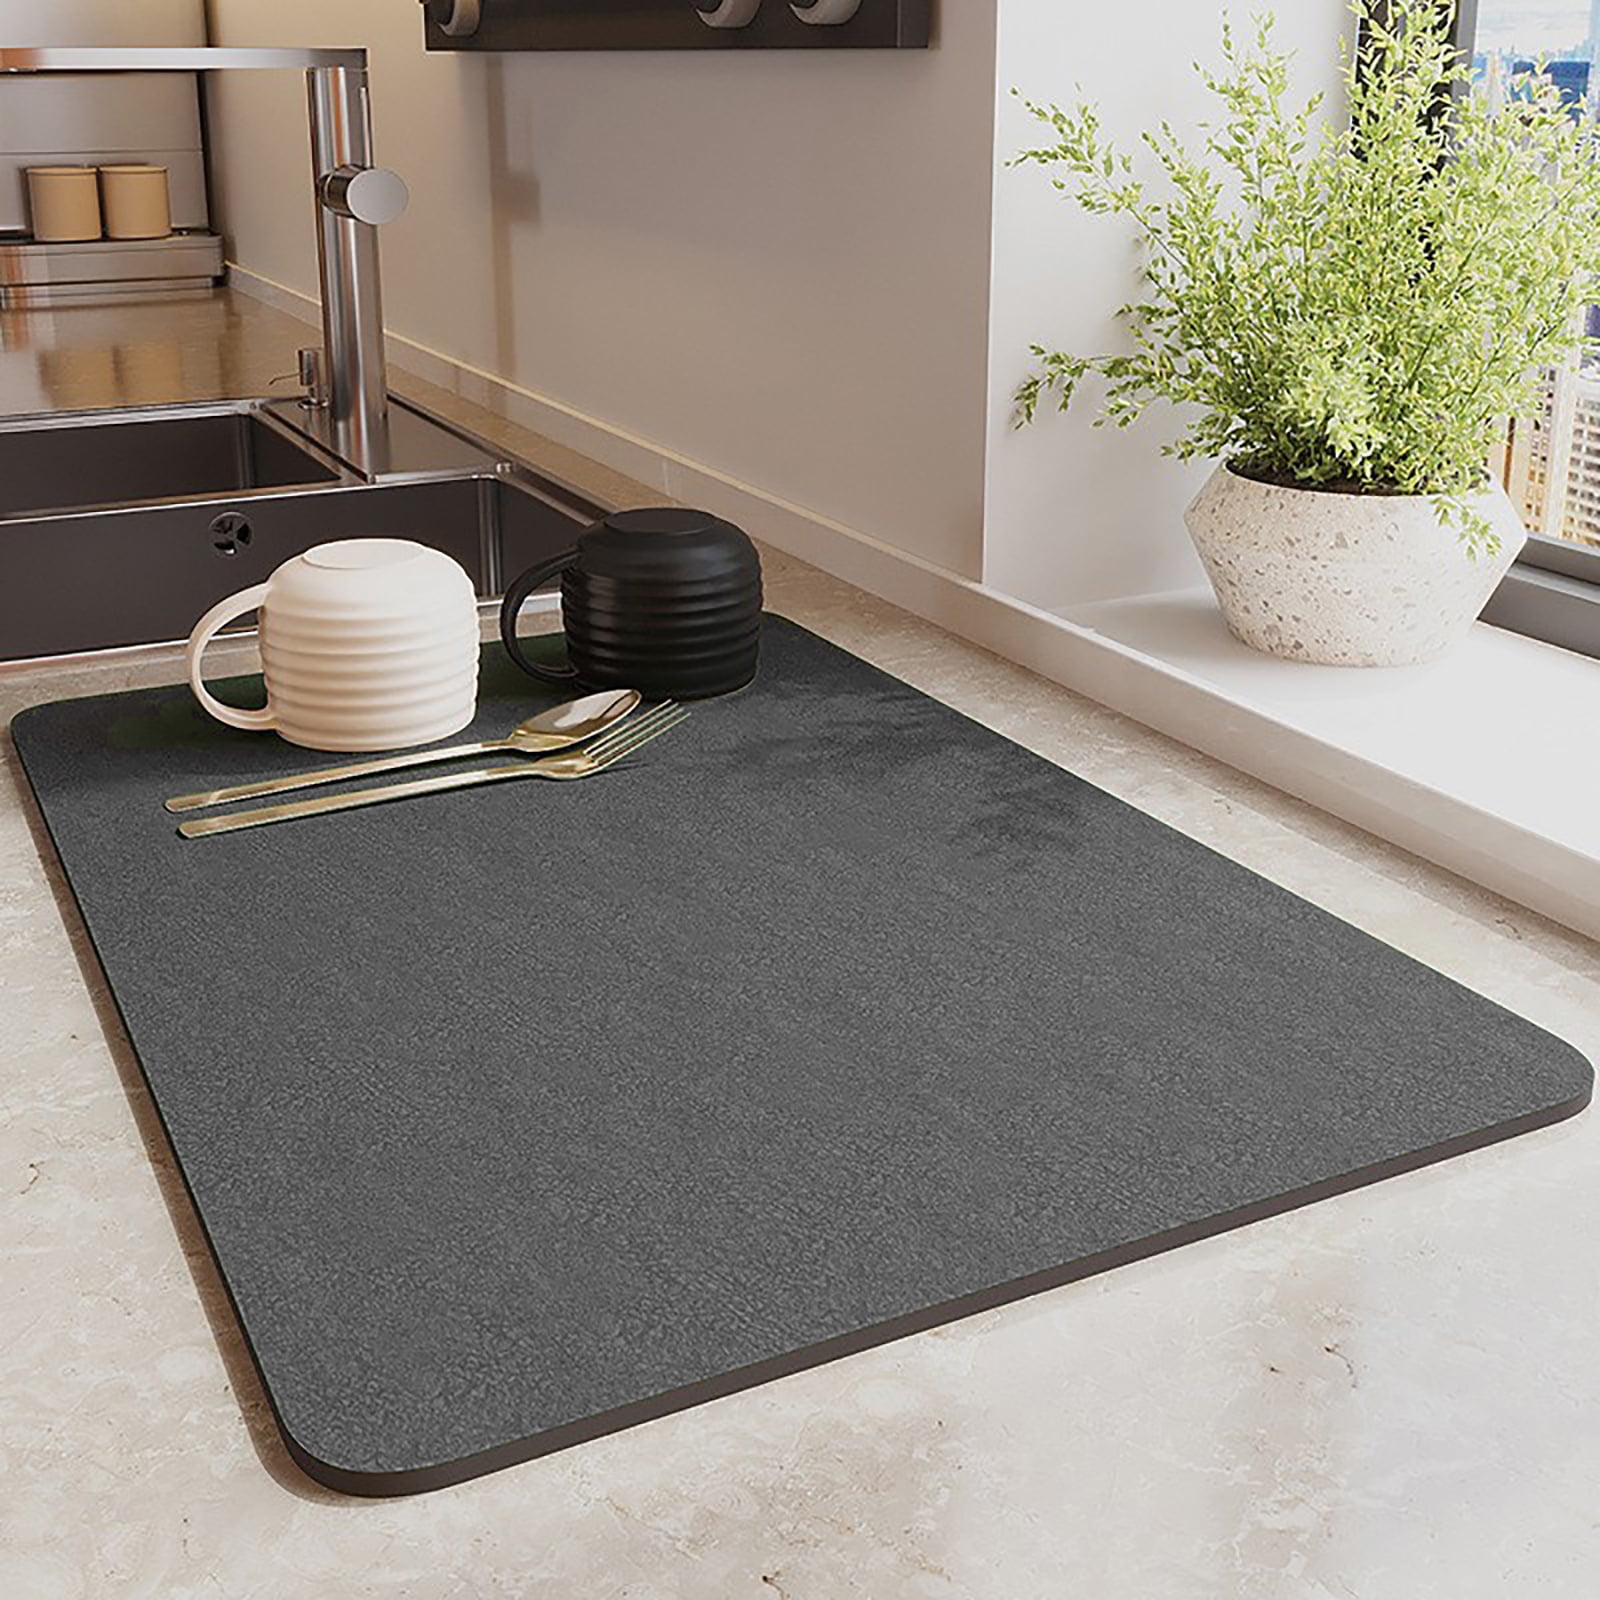 Coffee Mat for Countertops ,Coffee Bar Accessories Fit Under Coffee Maker  Espresso Machine,Super Absorbent Hide Stain Rubber Mat for Countertop ,Dish  Drying Mat for Kitchen Counter(Green, 20x24)